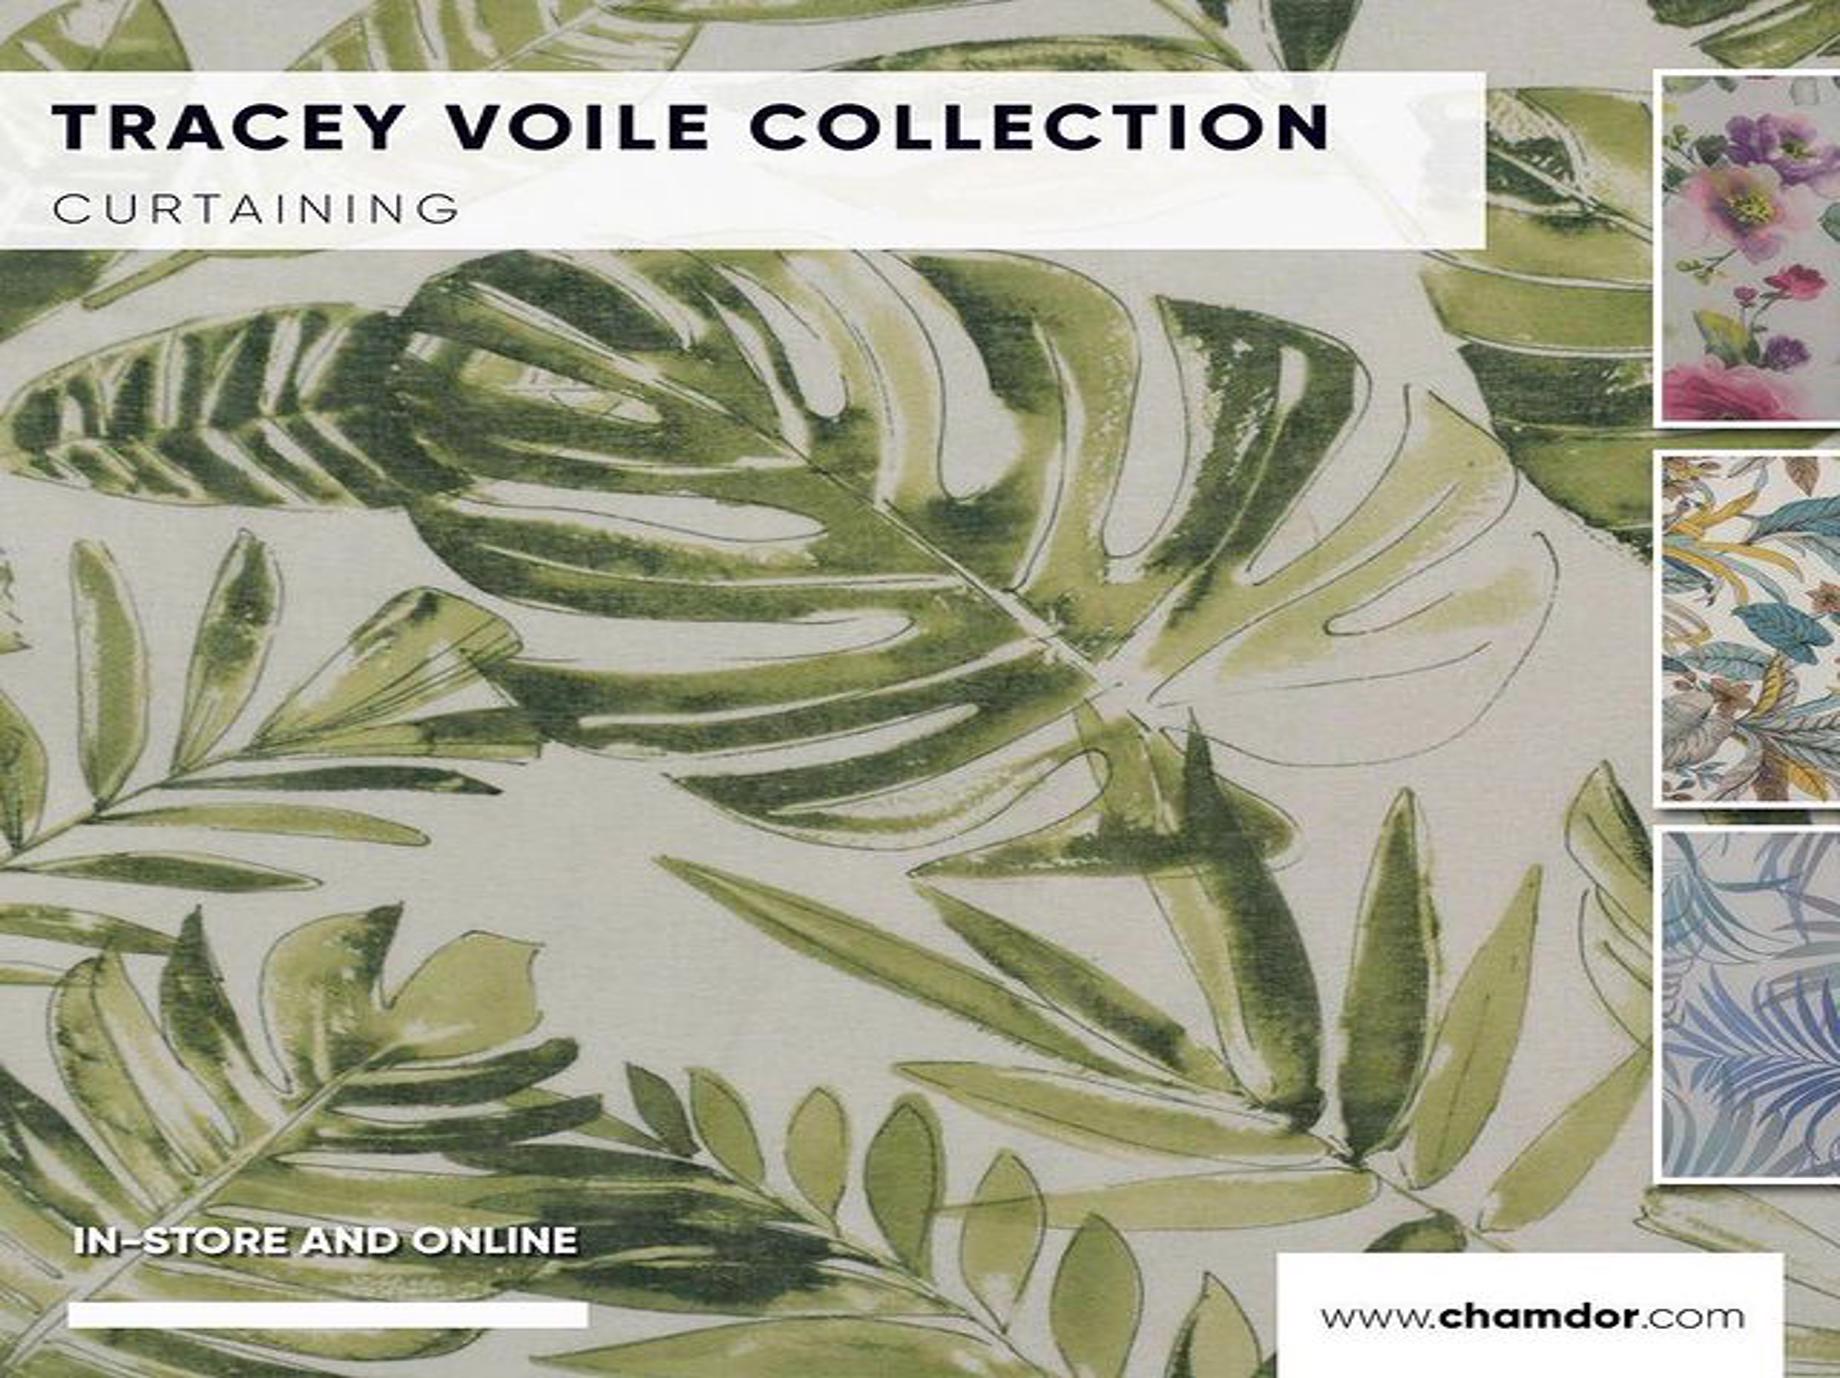 Tracey Voile Collection